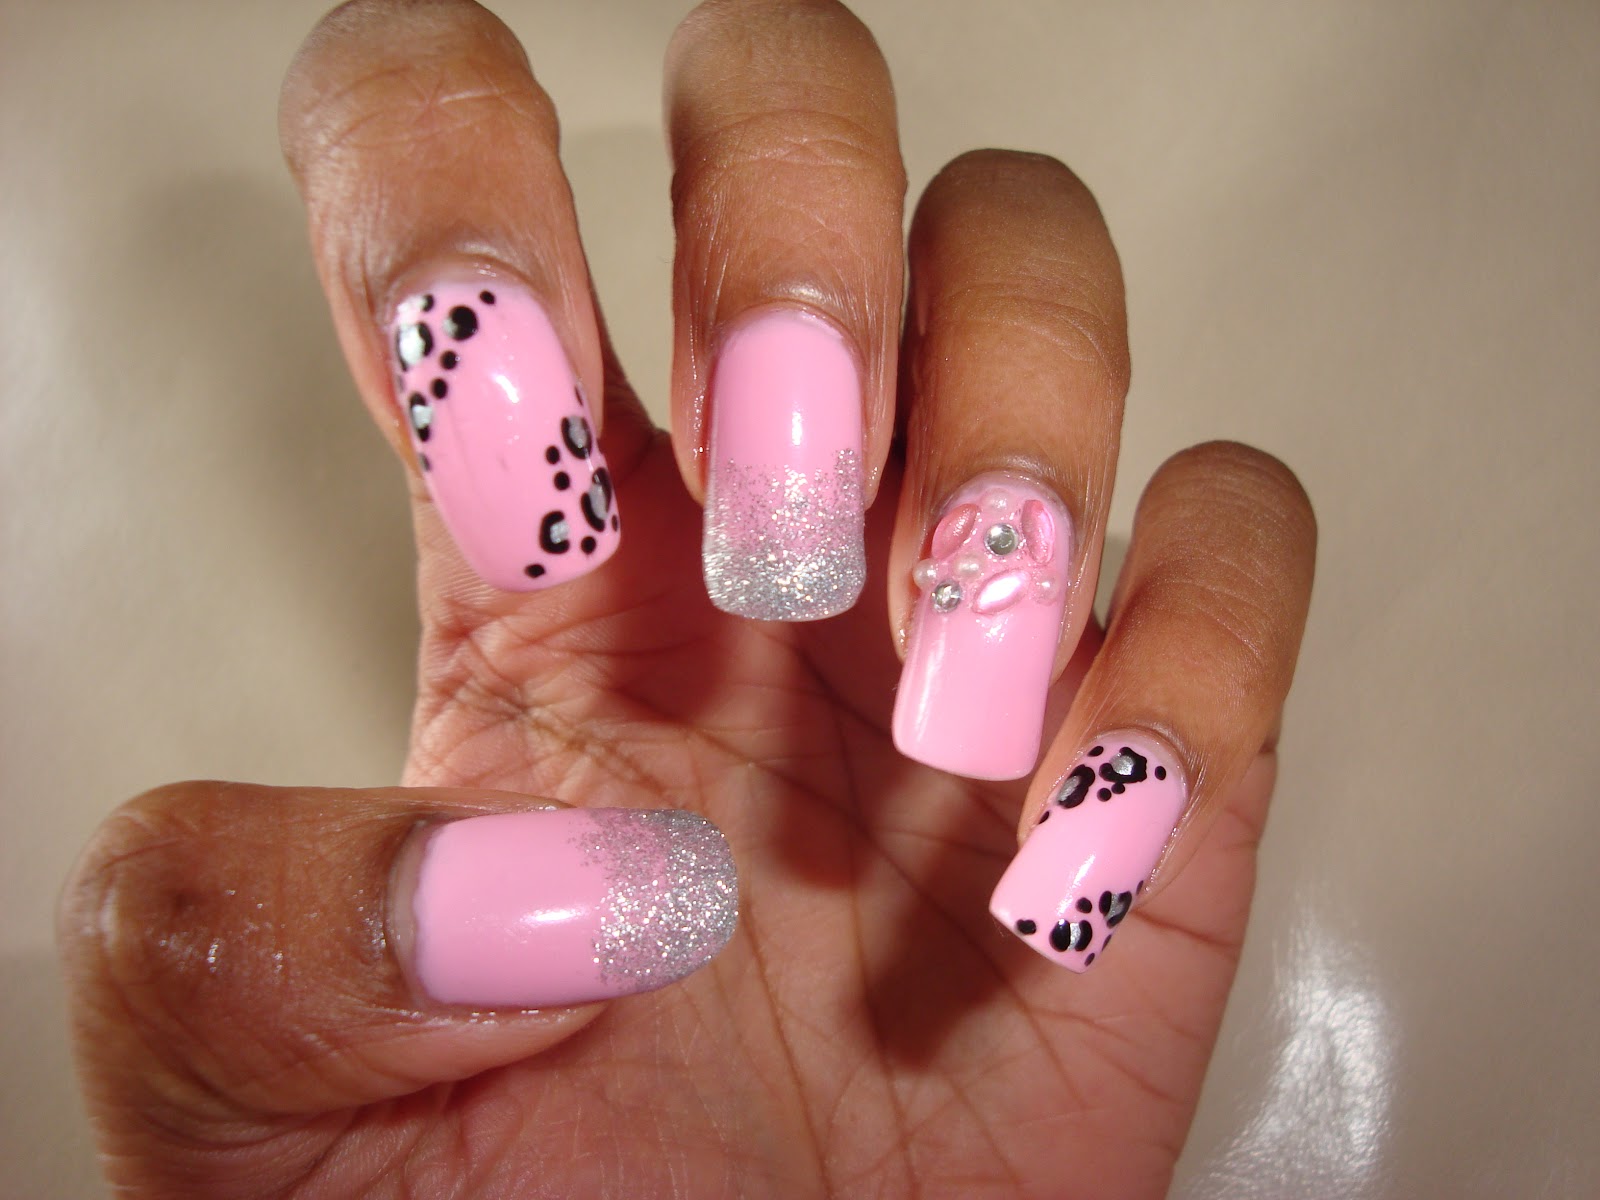 2. Black and Pink Floral Nail Design - wide 4